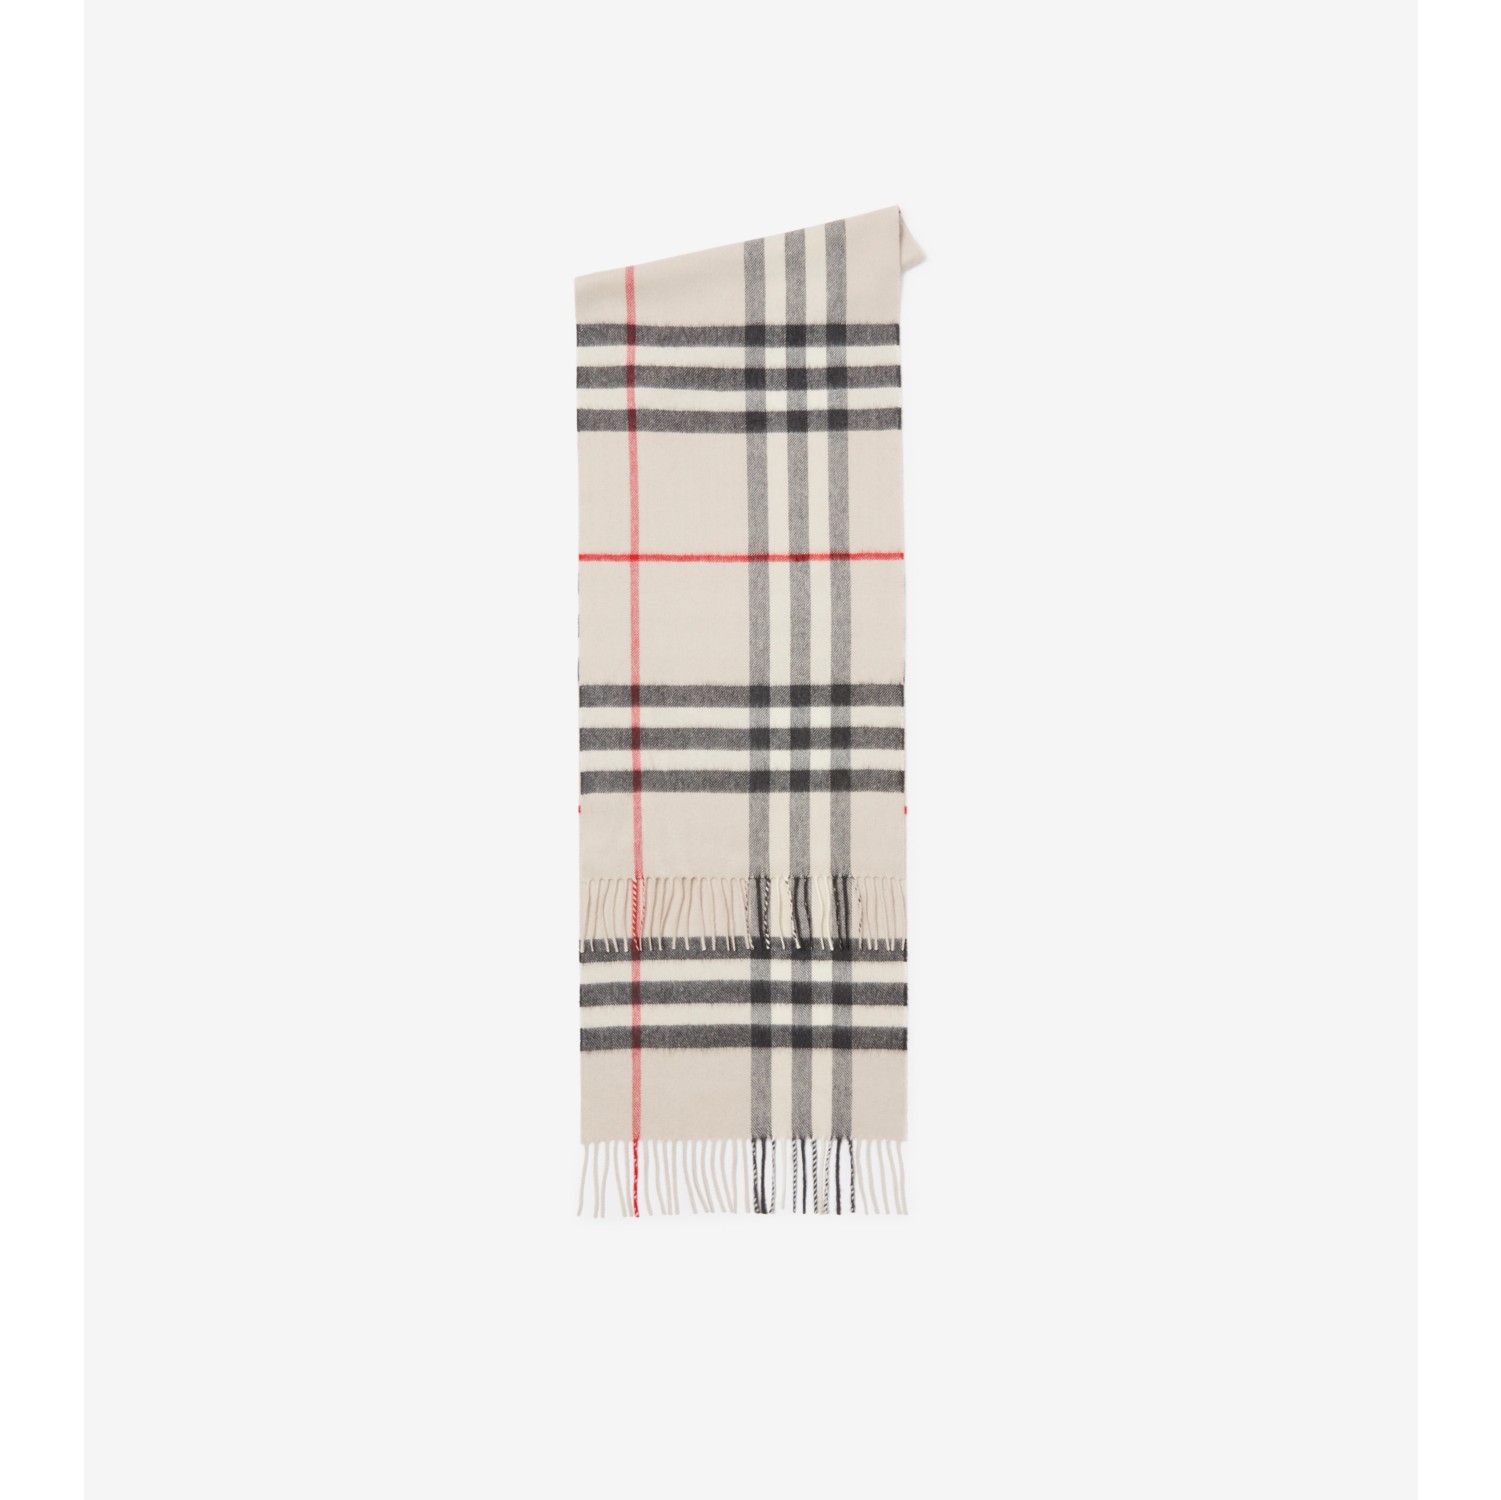 Burberry Scarf  Classic Cashmere Scarf in Claret